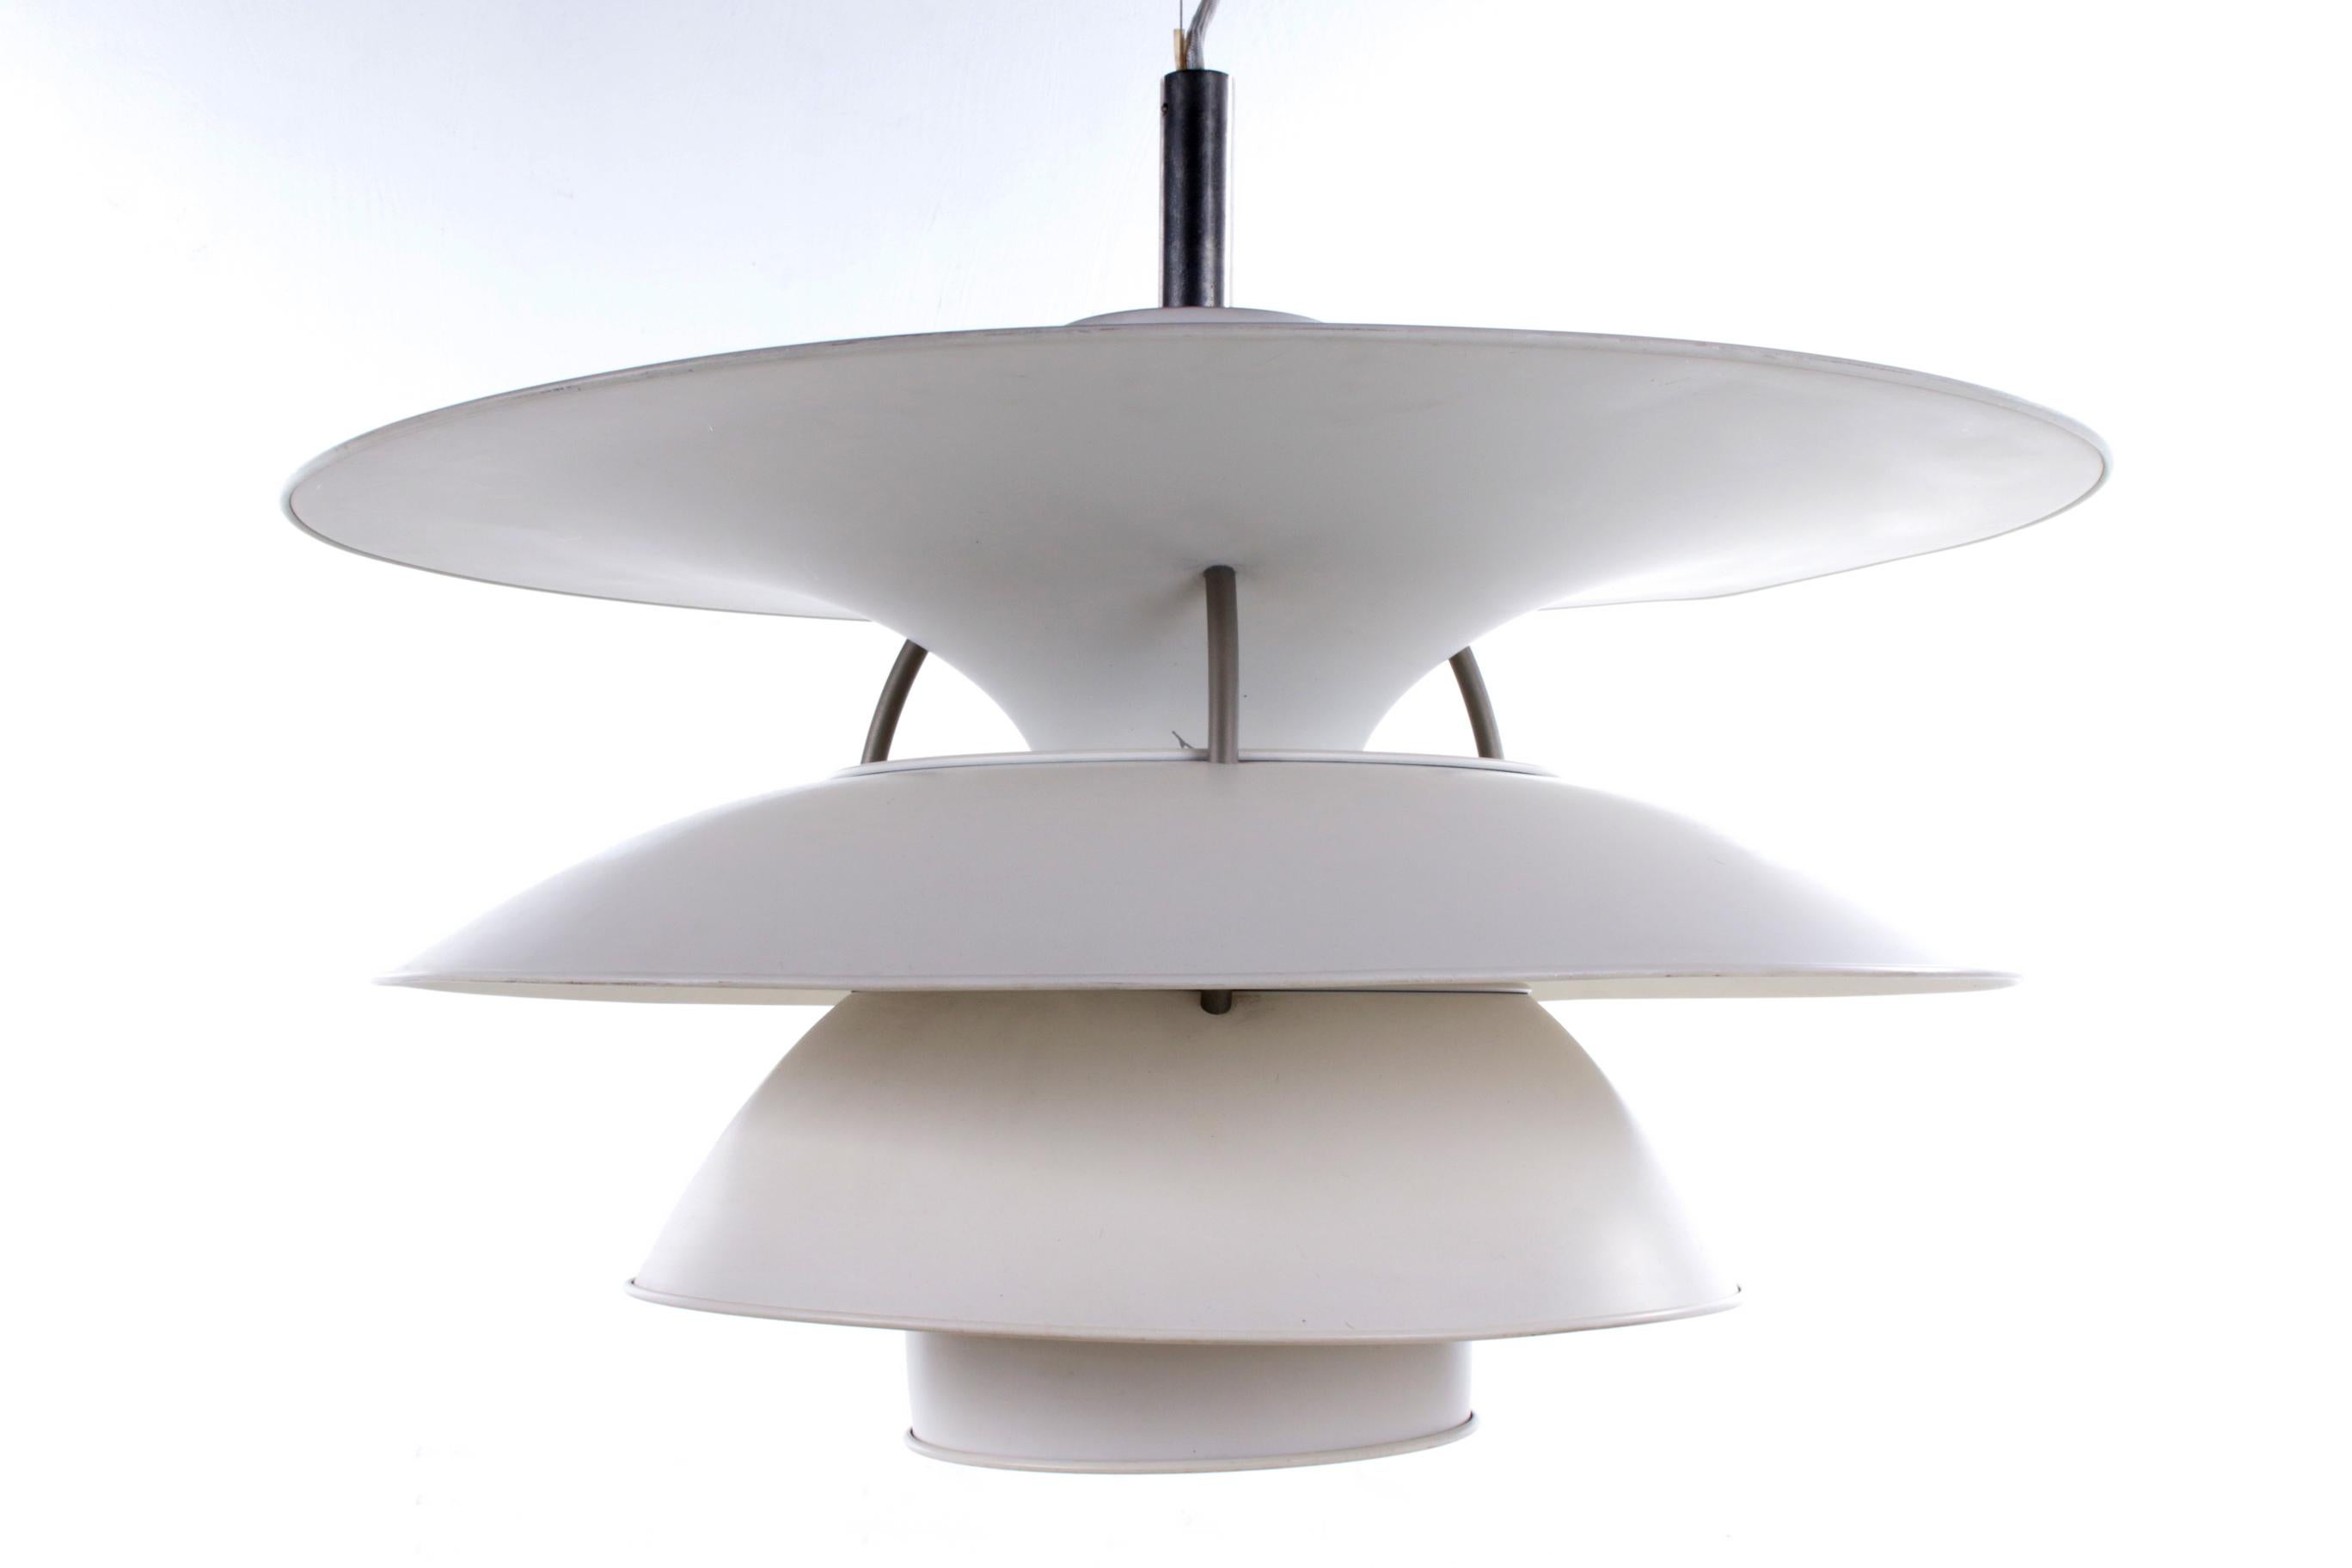 The Charlottenborg pendant lamp (Model PH 6-6.5) is a classic piece of famous Danish design. Designed by Poul Henningsen for the Danish company Louis Poulsen around the 1960s.

The lamp consists of four large white lampshades made of white